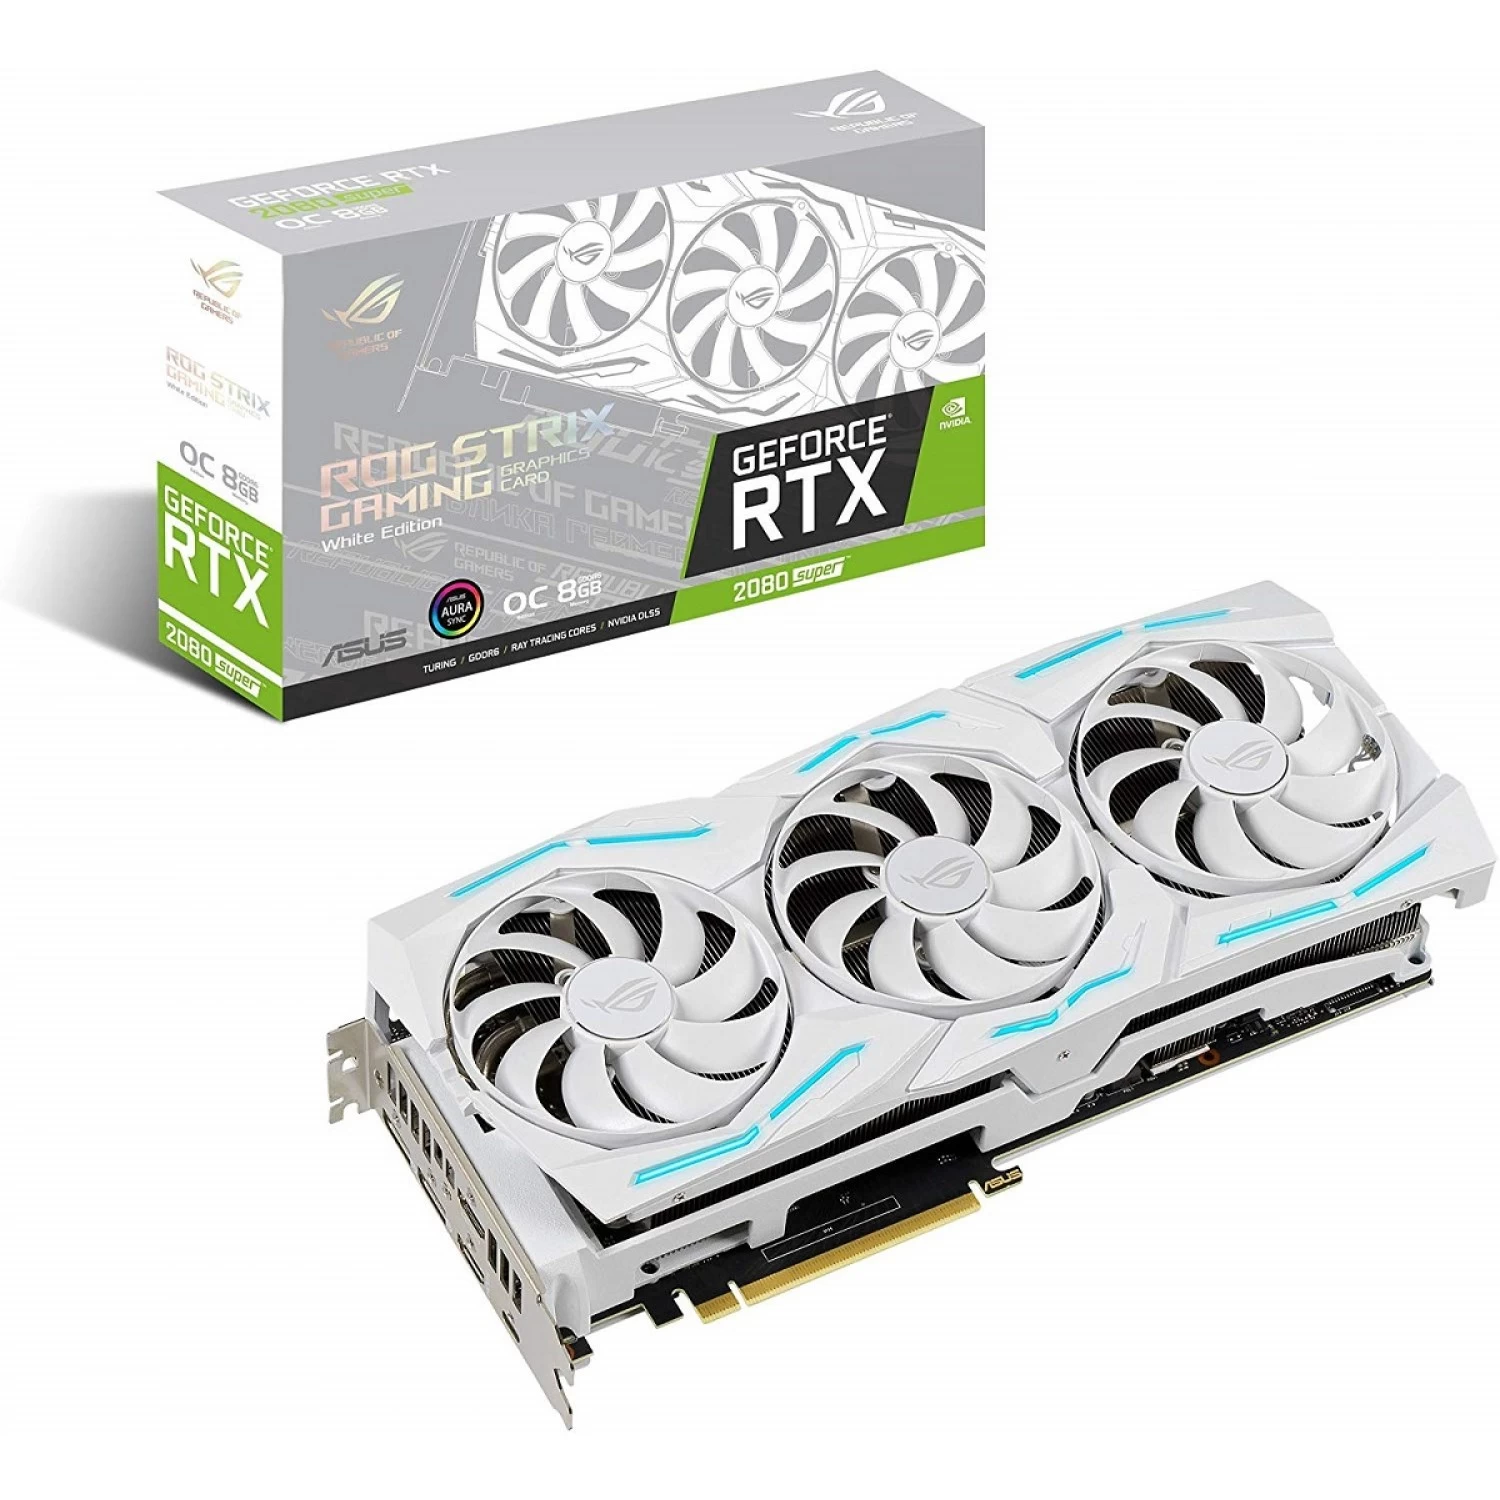 ASUS ROG STRIX RTX 2080 SUPER White GAMING OC Package